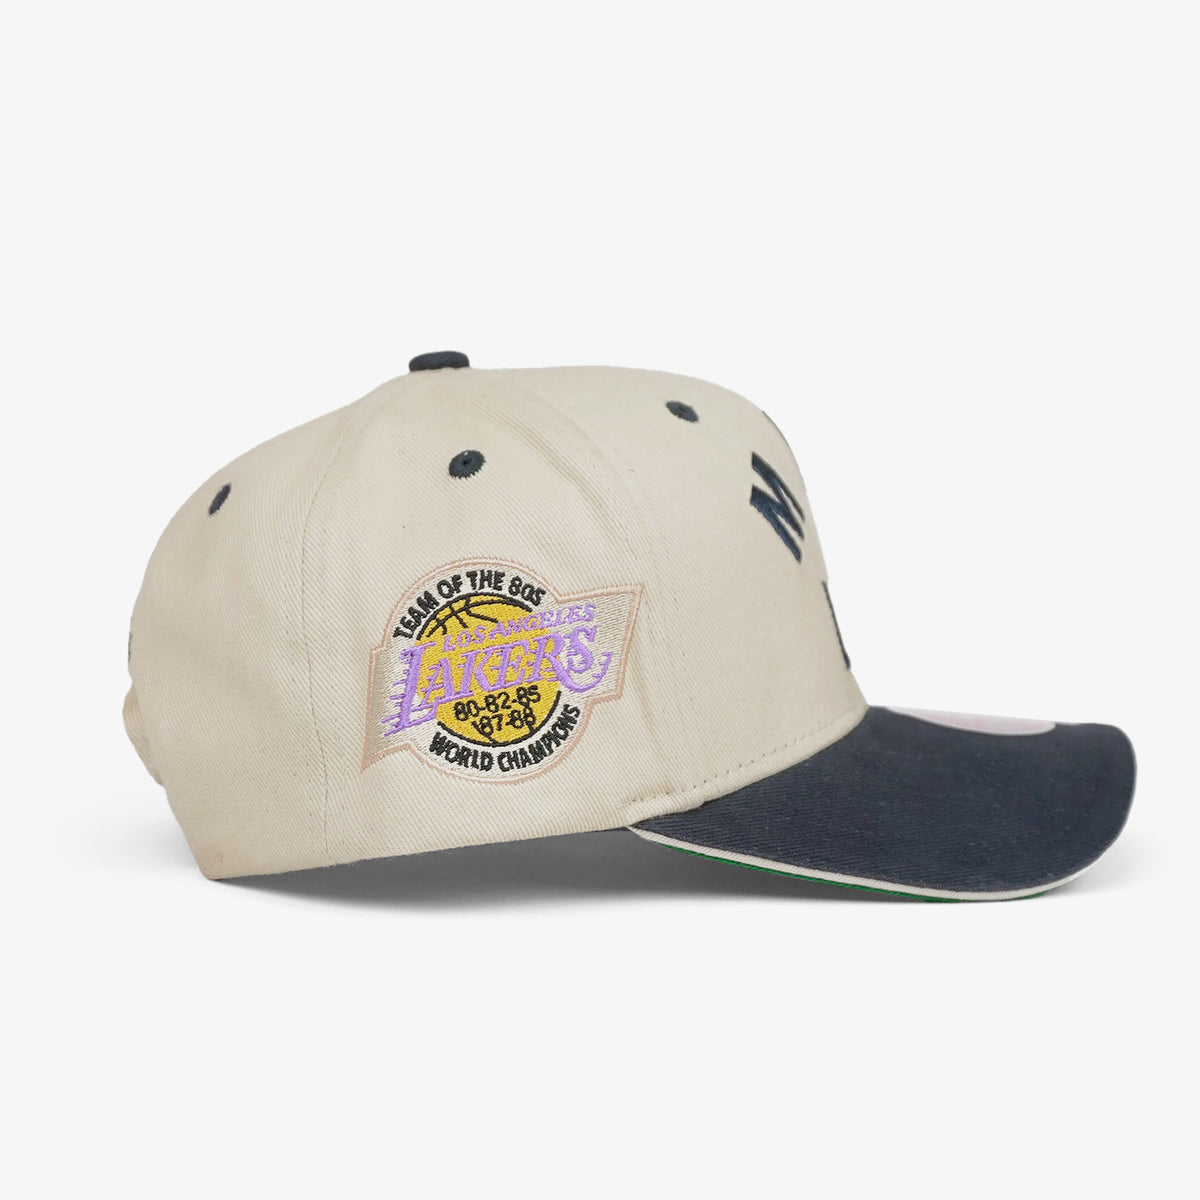 mitchell and ness pro crown snapback